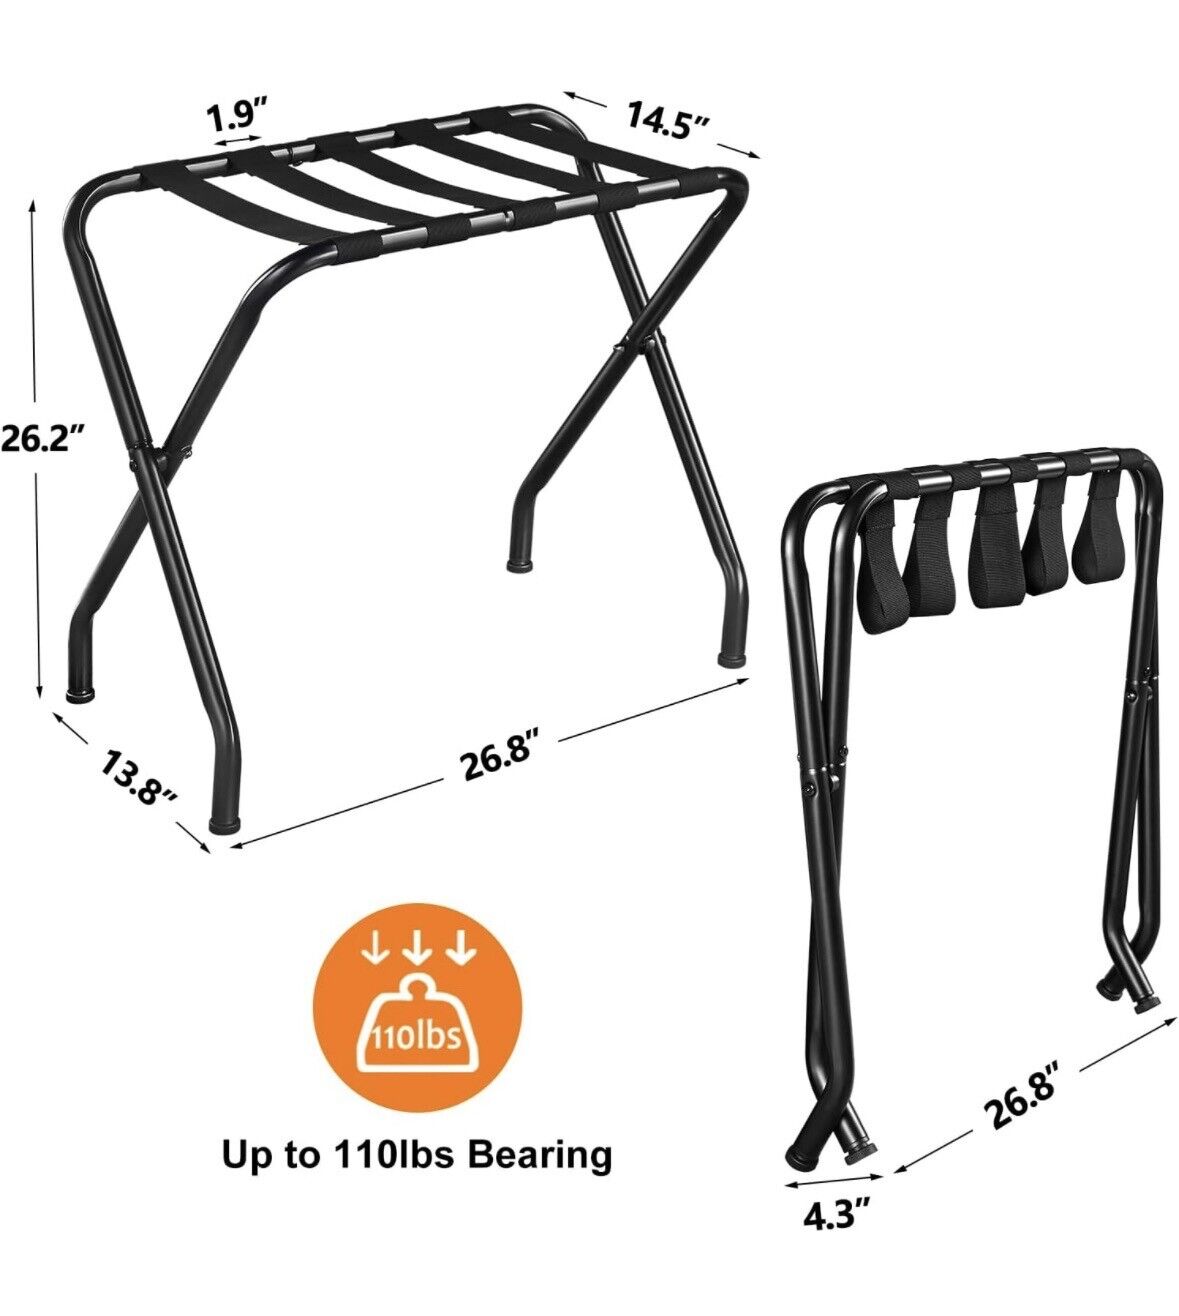 2-Pack Folding Luggage Rack, Suitcase Stand